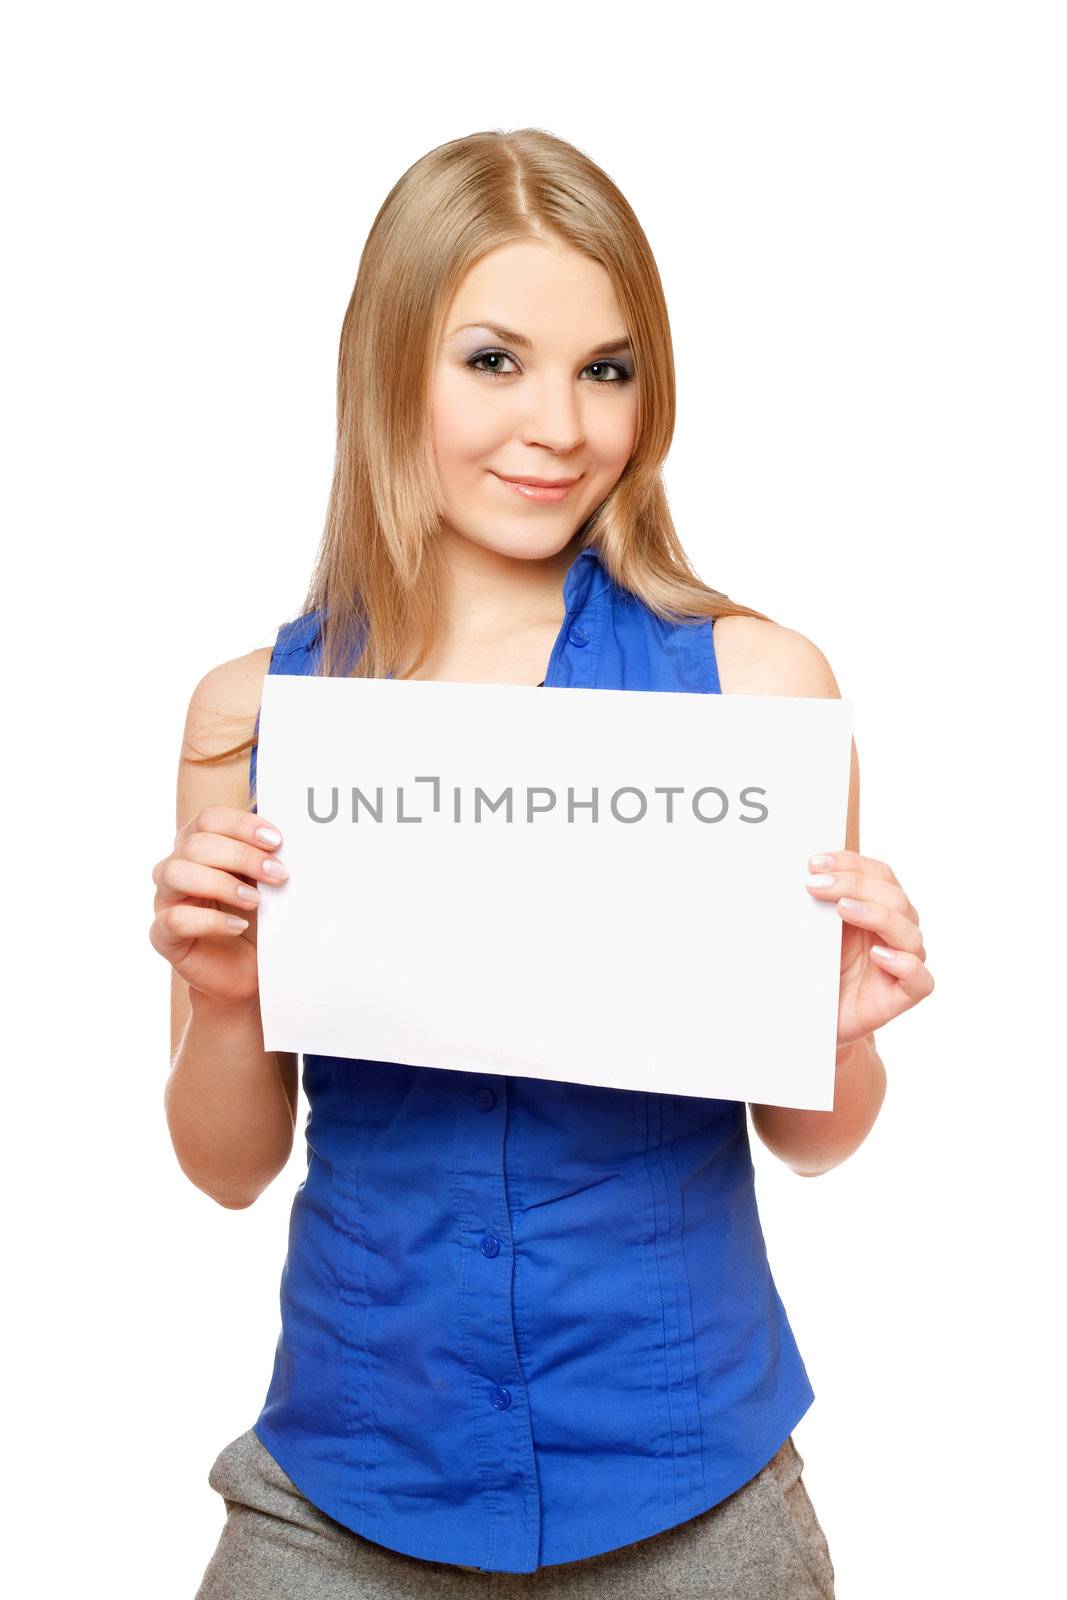 Beautiful young woman holding empty white board. Isolated